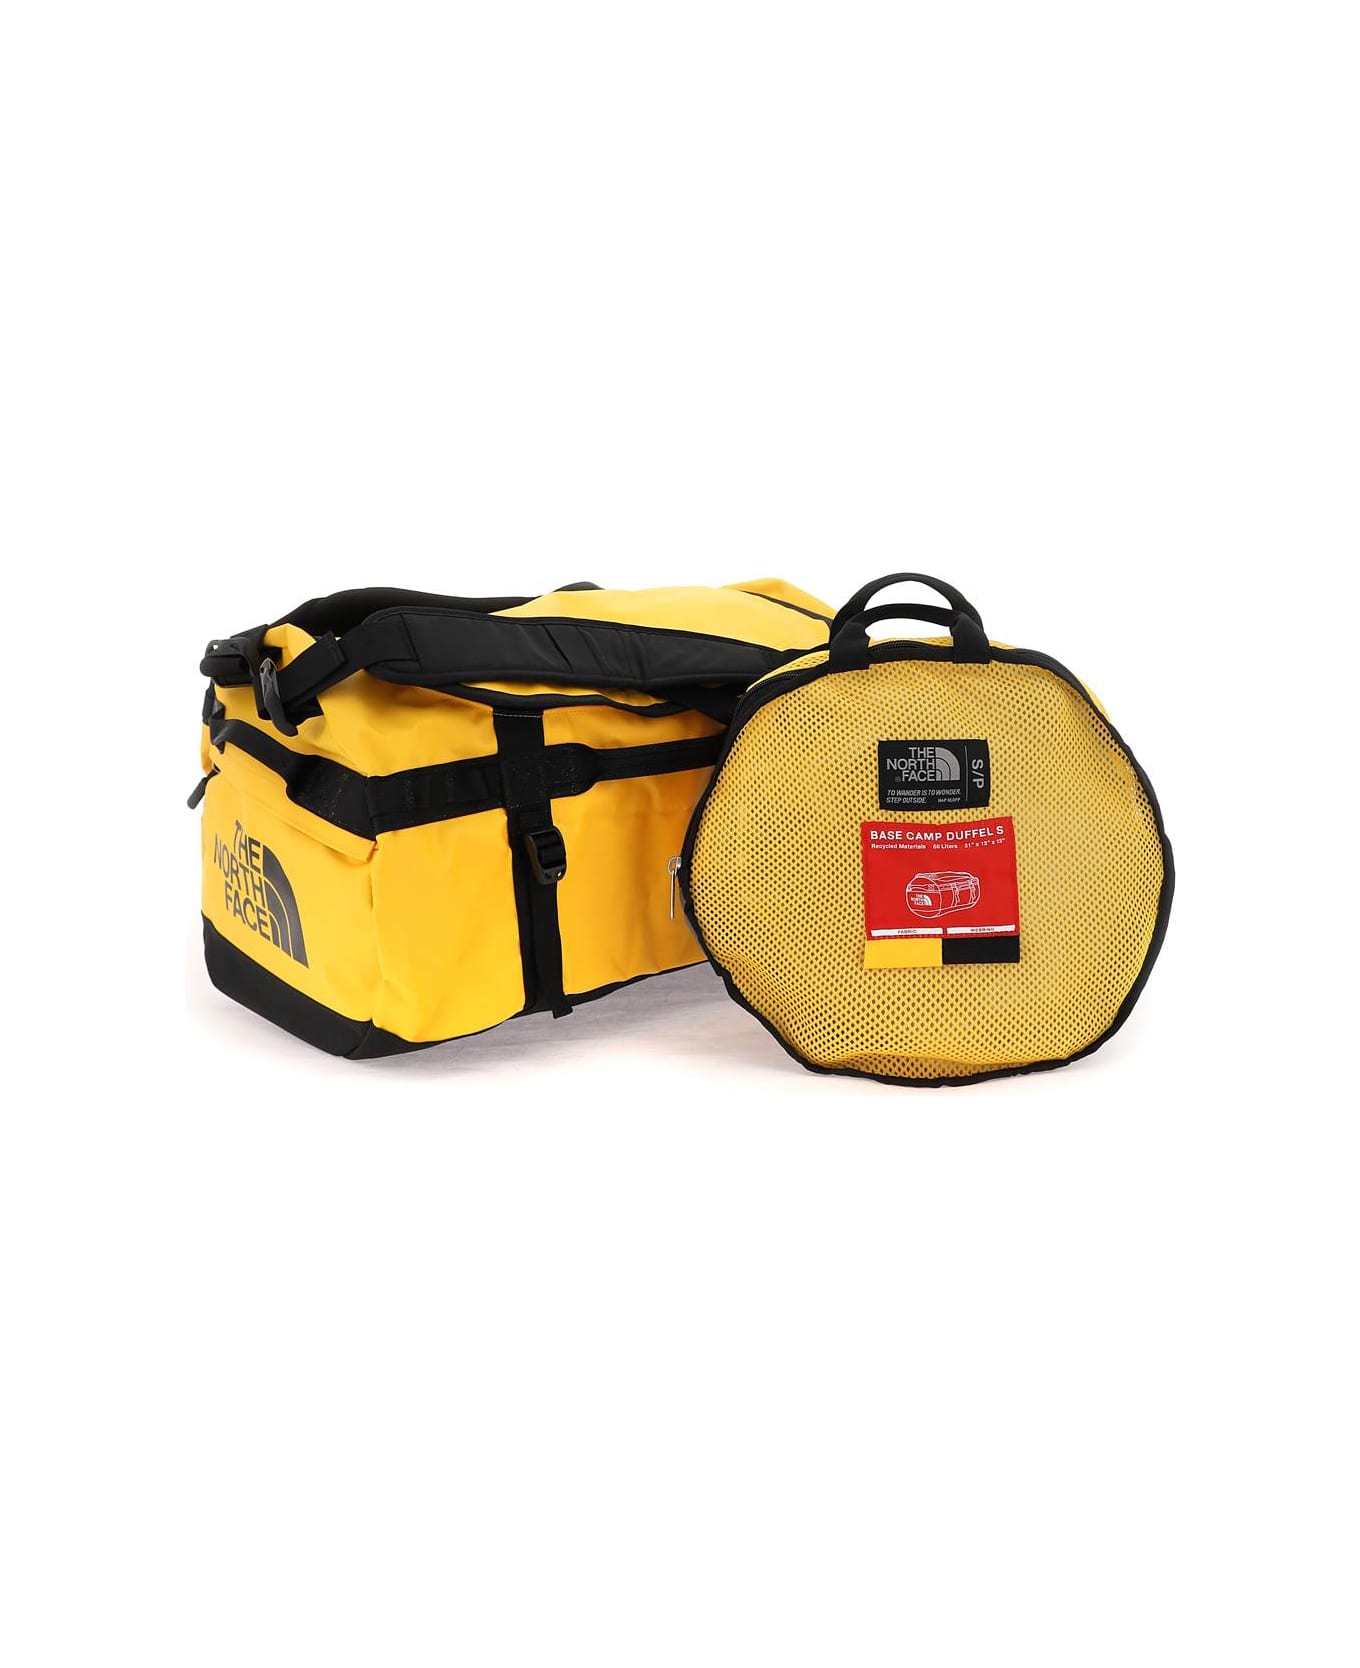 The North Face Small Base Camp Duffel Bag - SUMMIT GOLD TNF BLACK (Yellow)